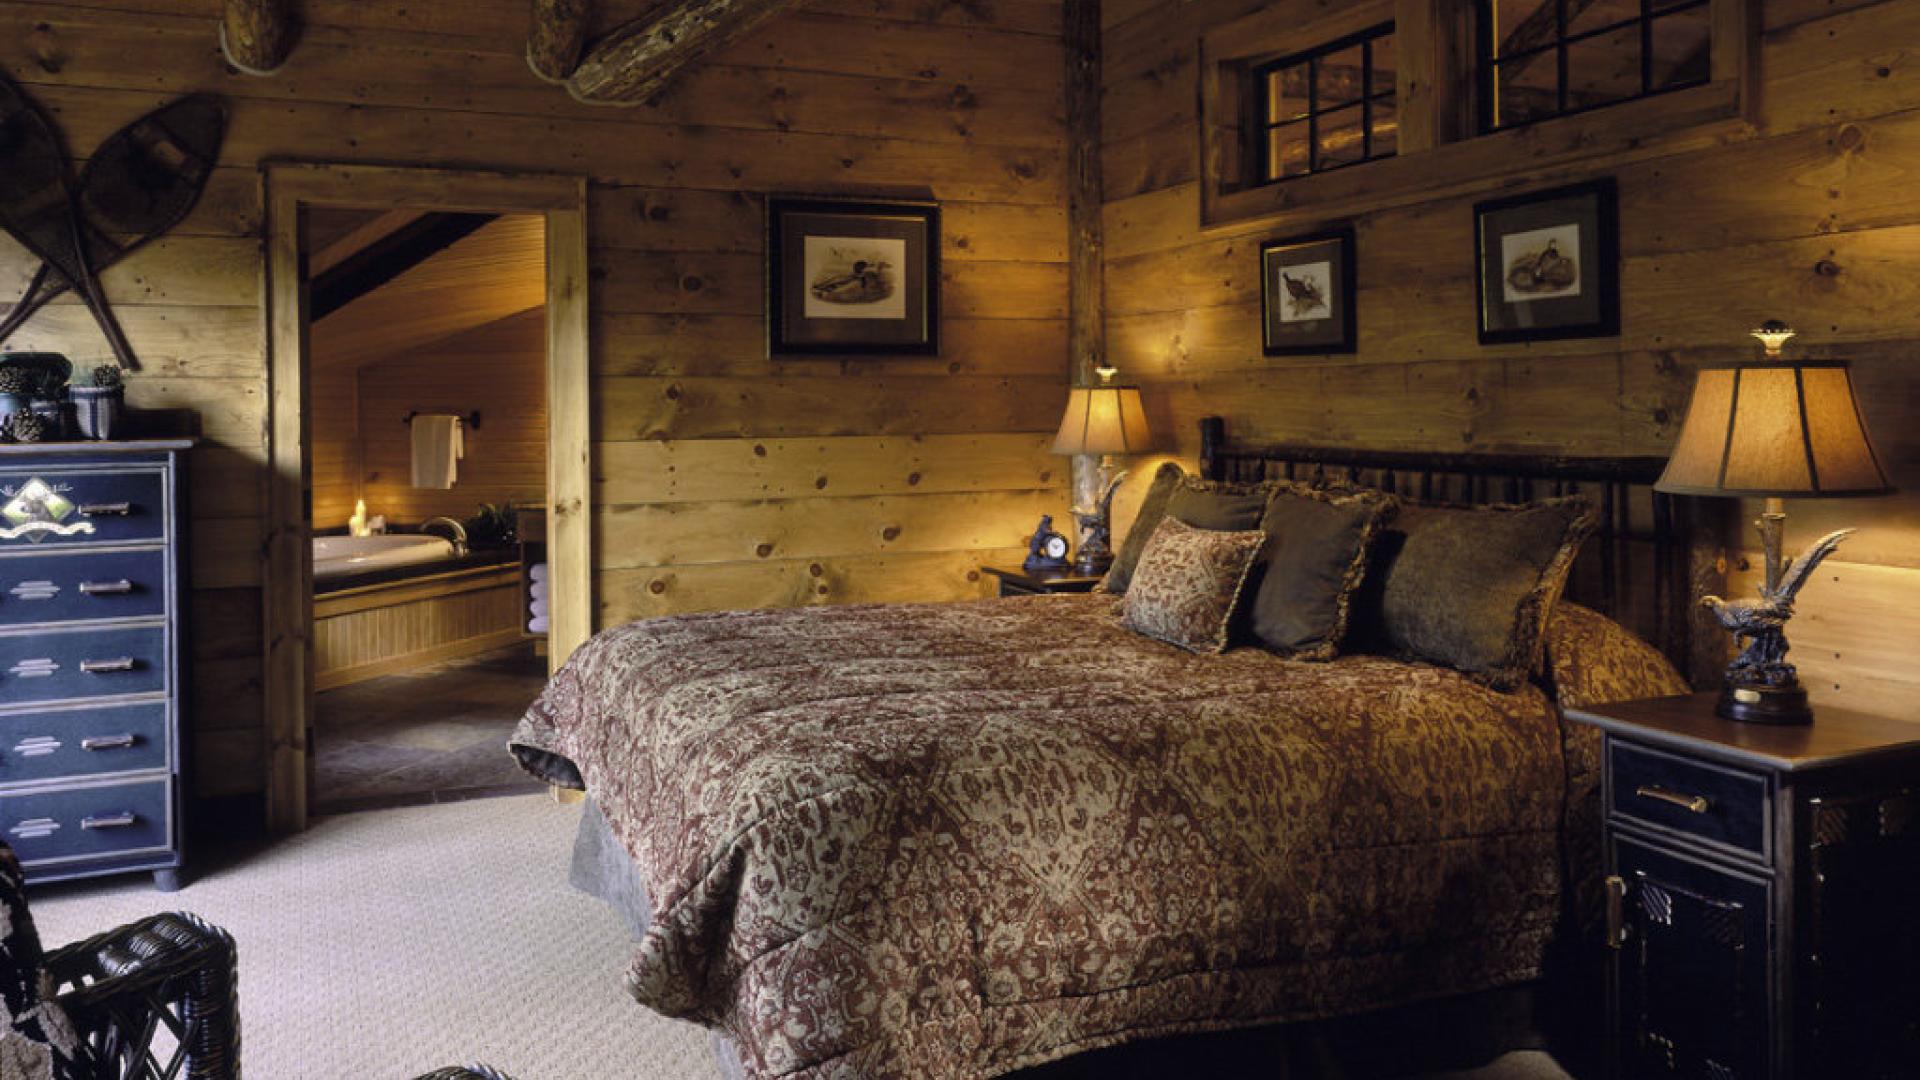 Whiteface Lodge Resort & Spa